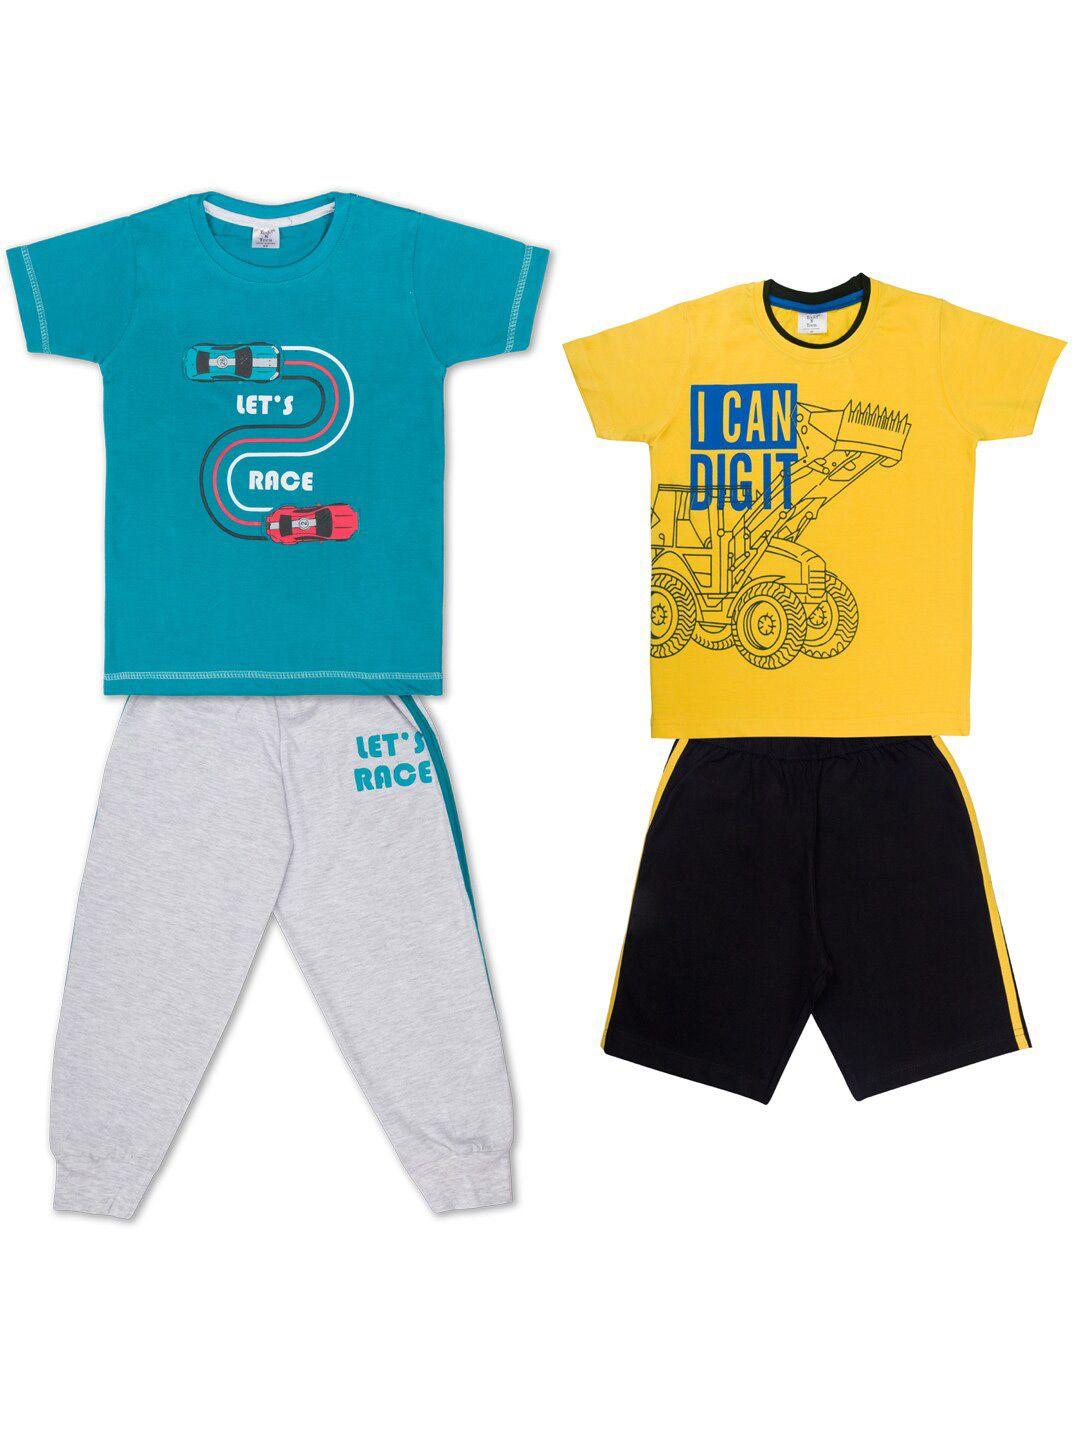 todd n teen boys turquoise blue & yellow set of 2 printed cotton t-shirt & shorts